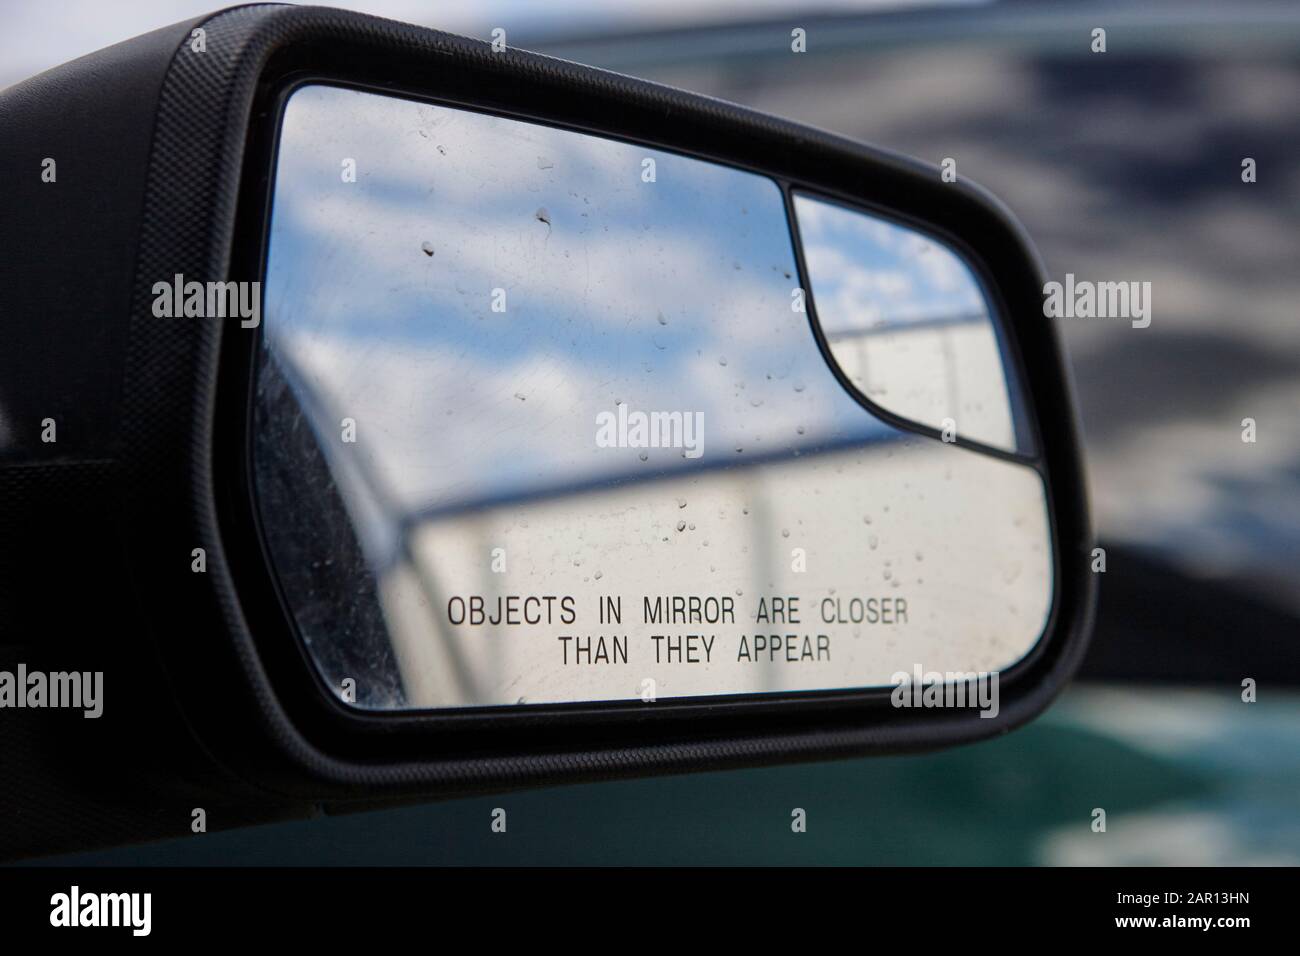 objects in mirror are closer than they appear on car side mirror Stock Photo